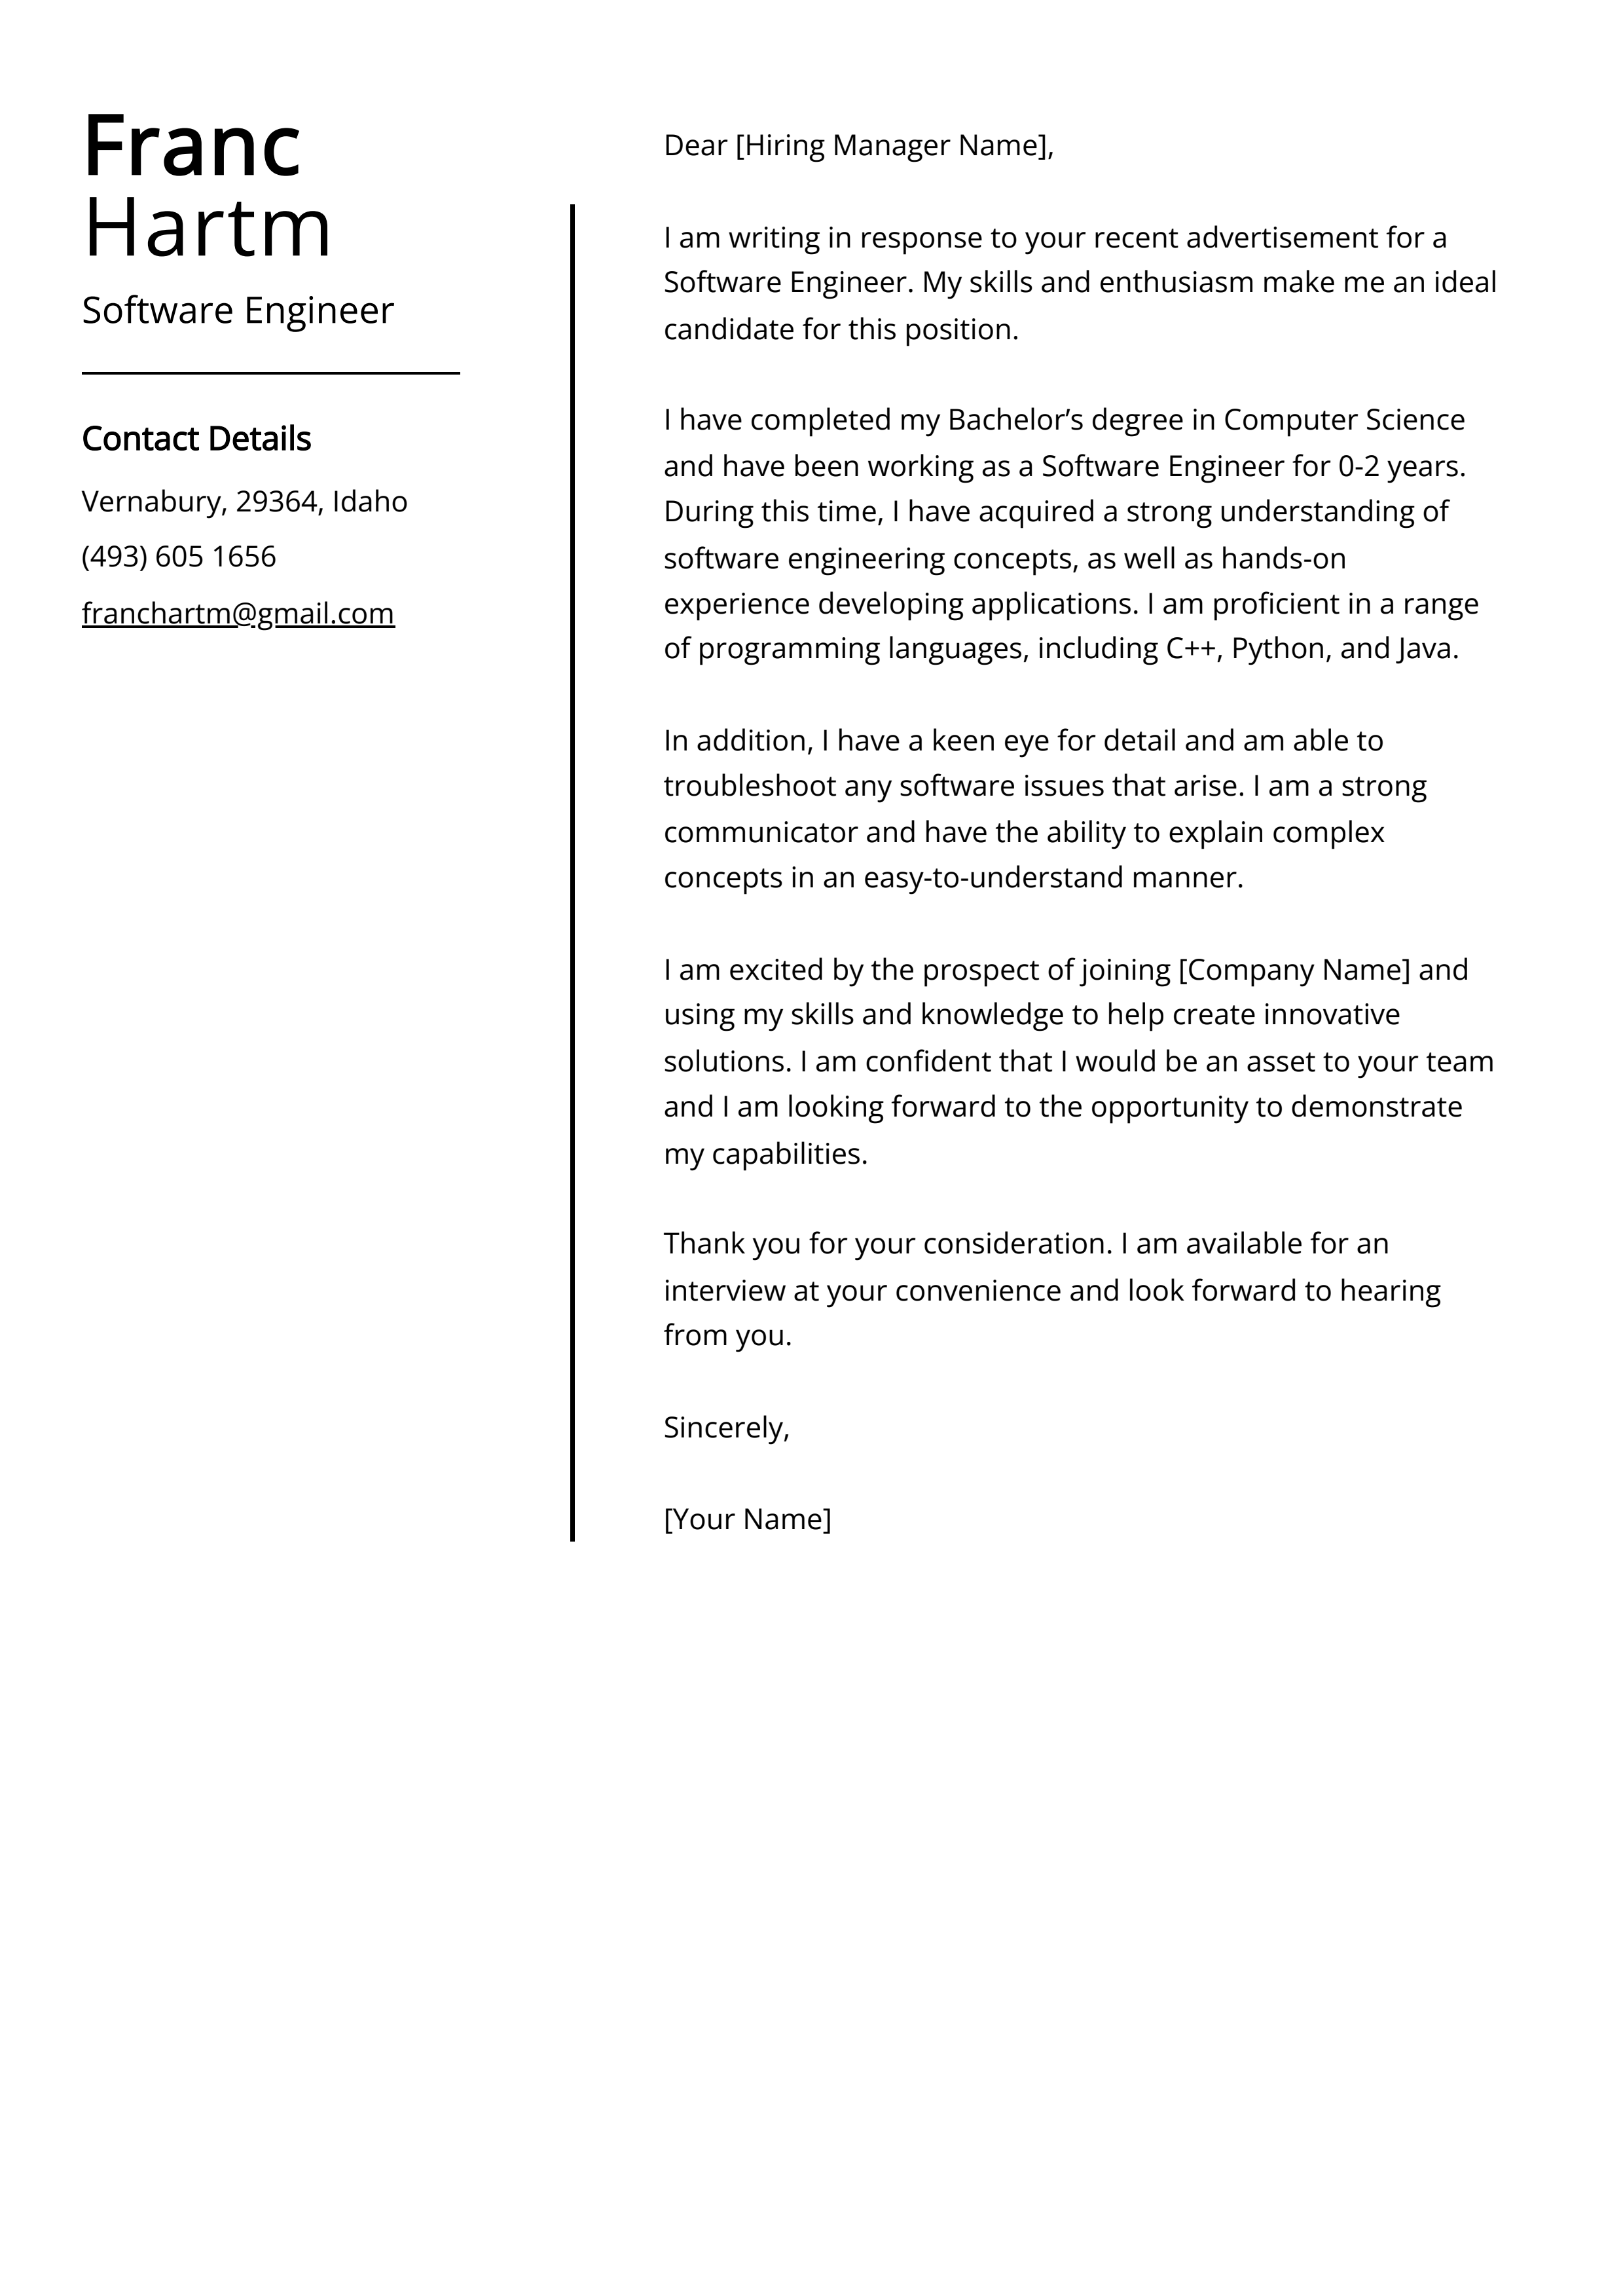 Experienced Software Engineer Cover Letter Example (Free Guide)